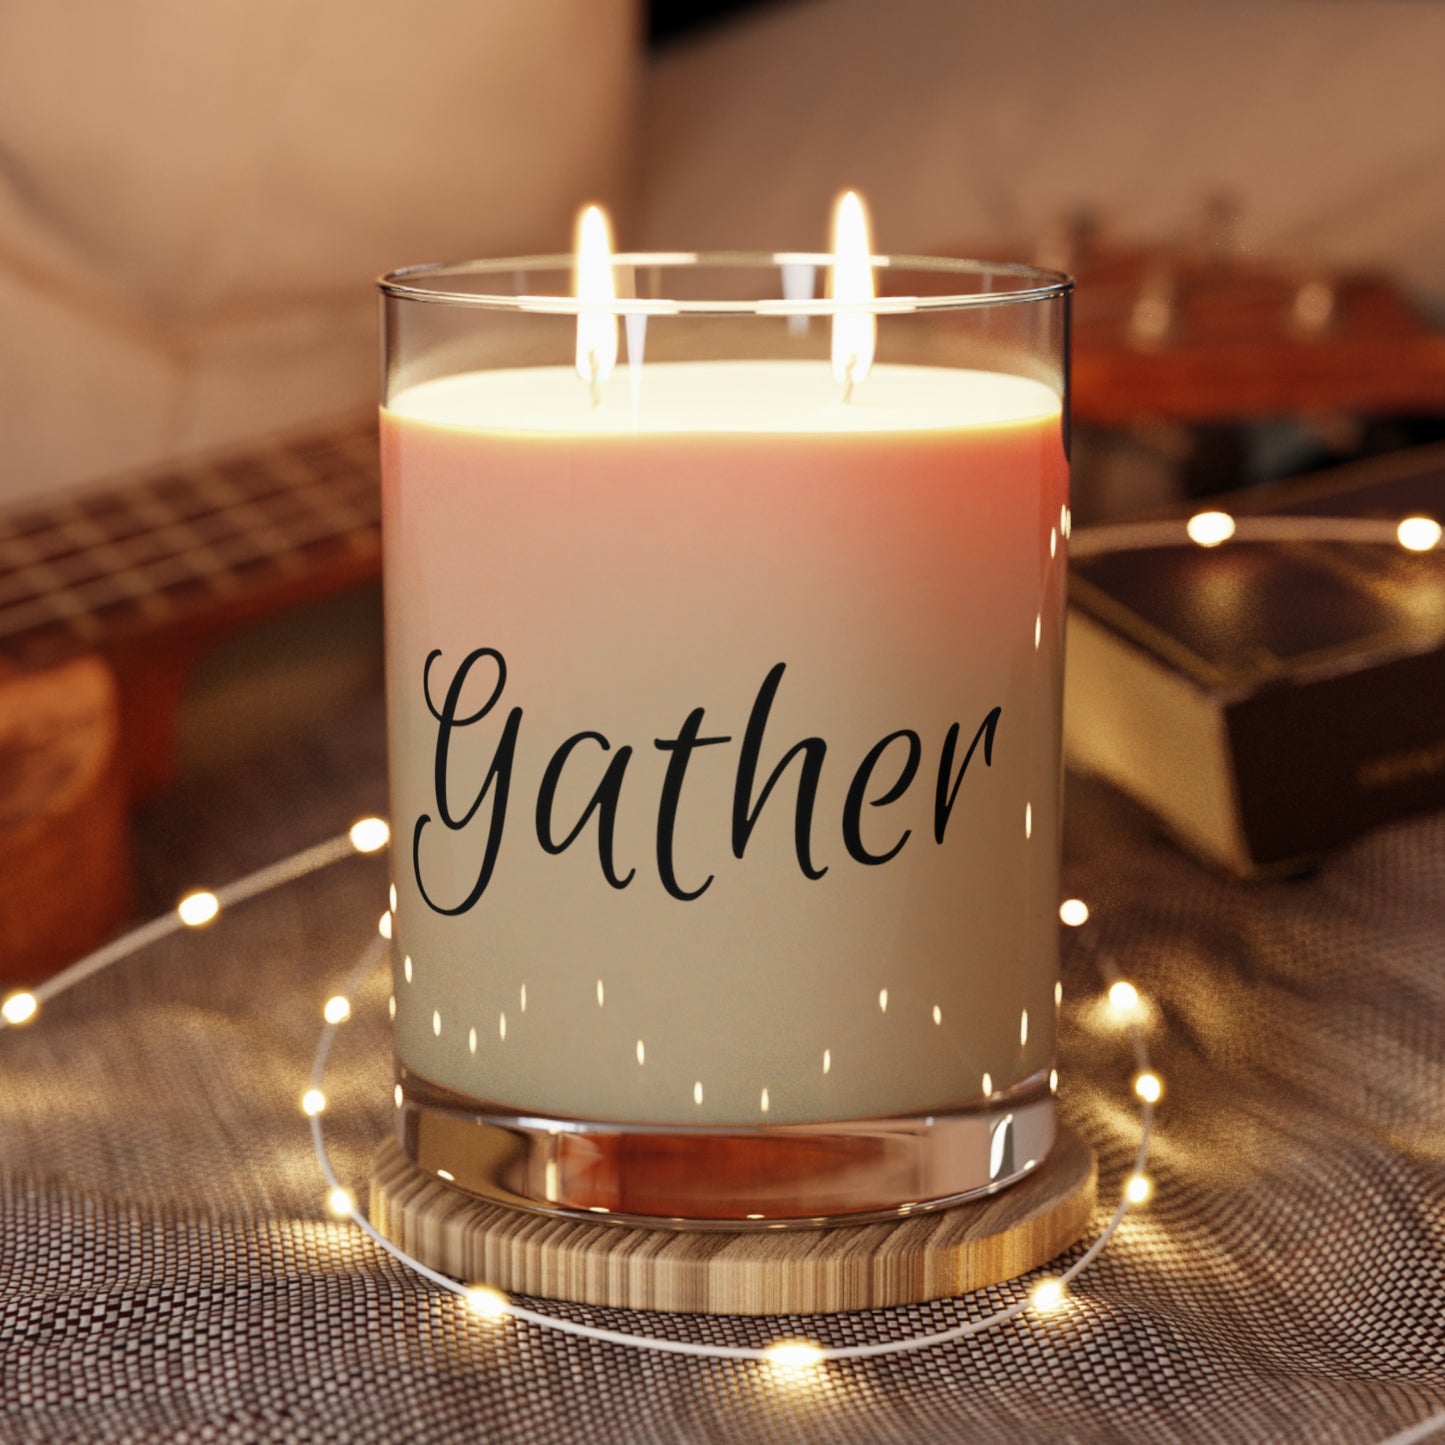 Gather - Scented Candle